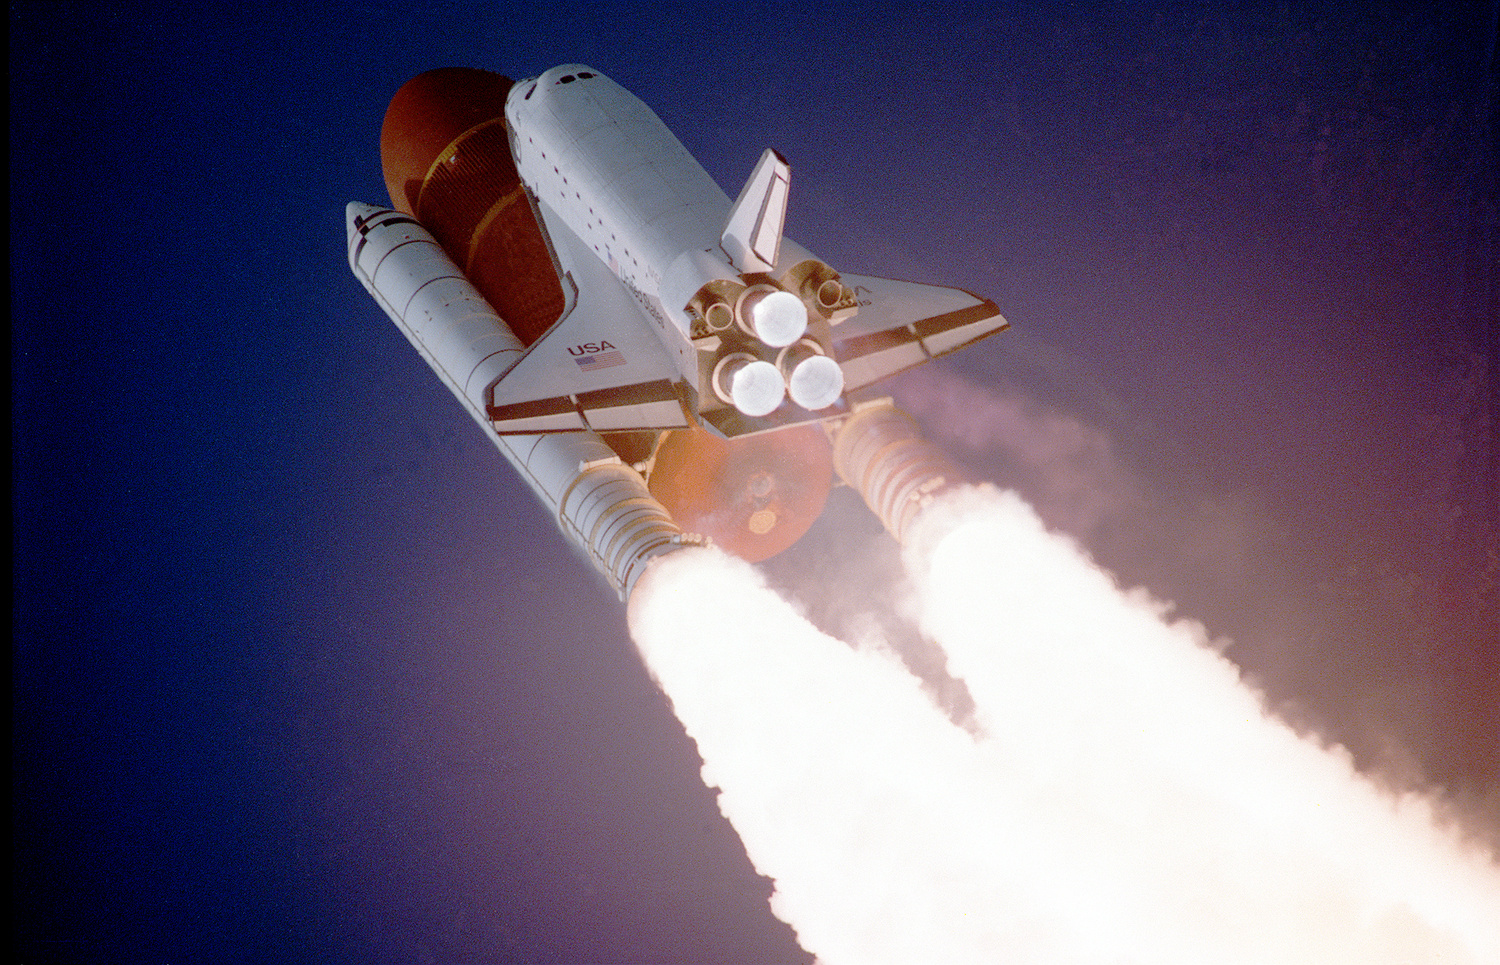 Space Shuttle Atlantis takes flight on its STS-27 mission on December 2, 1988